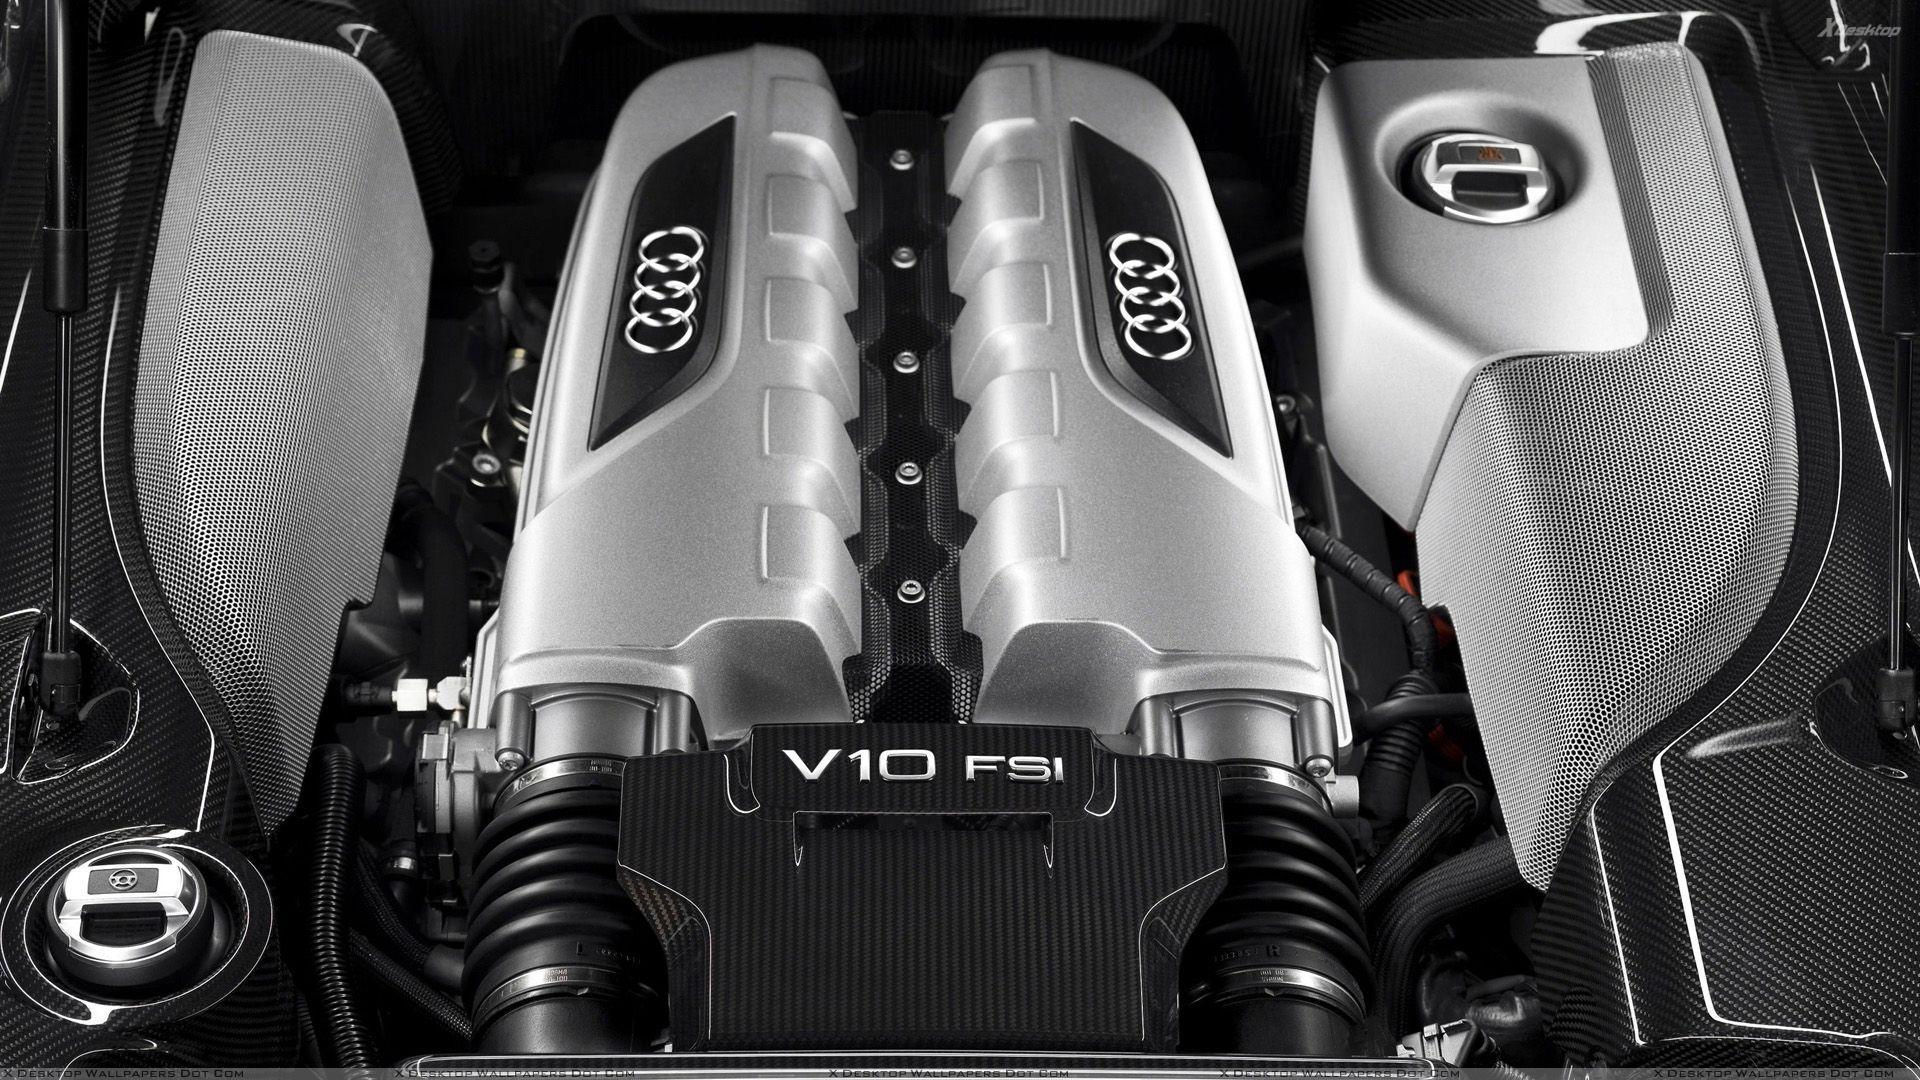 Car Engines Wallpaper, Photo & Image in HD